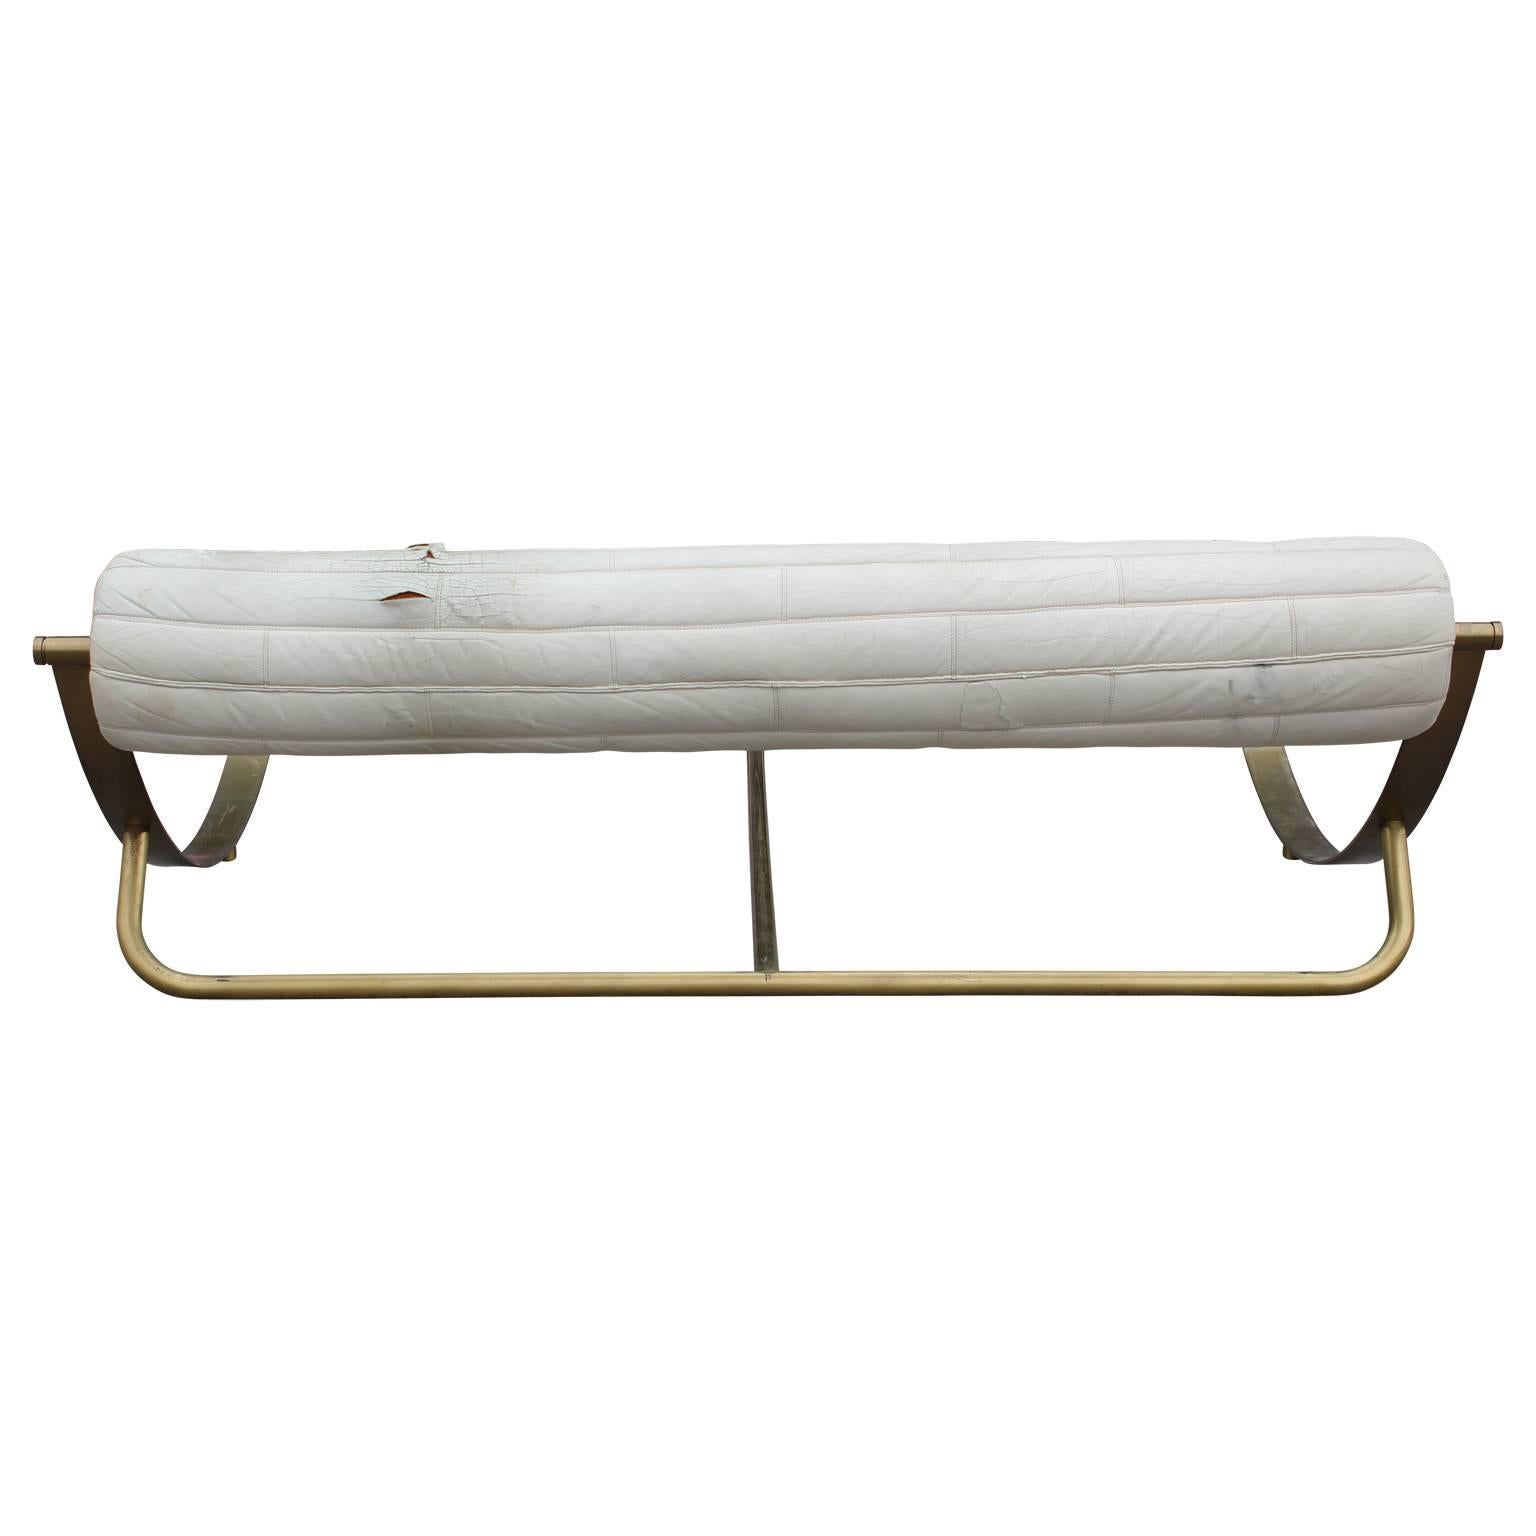 Mid-20th Century Modern Italian Brass Bed with White Leather Headboard